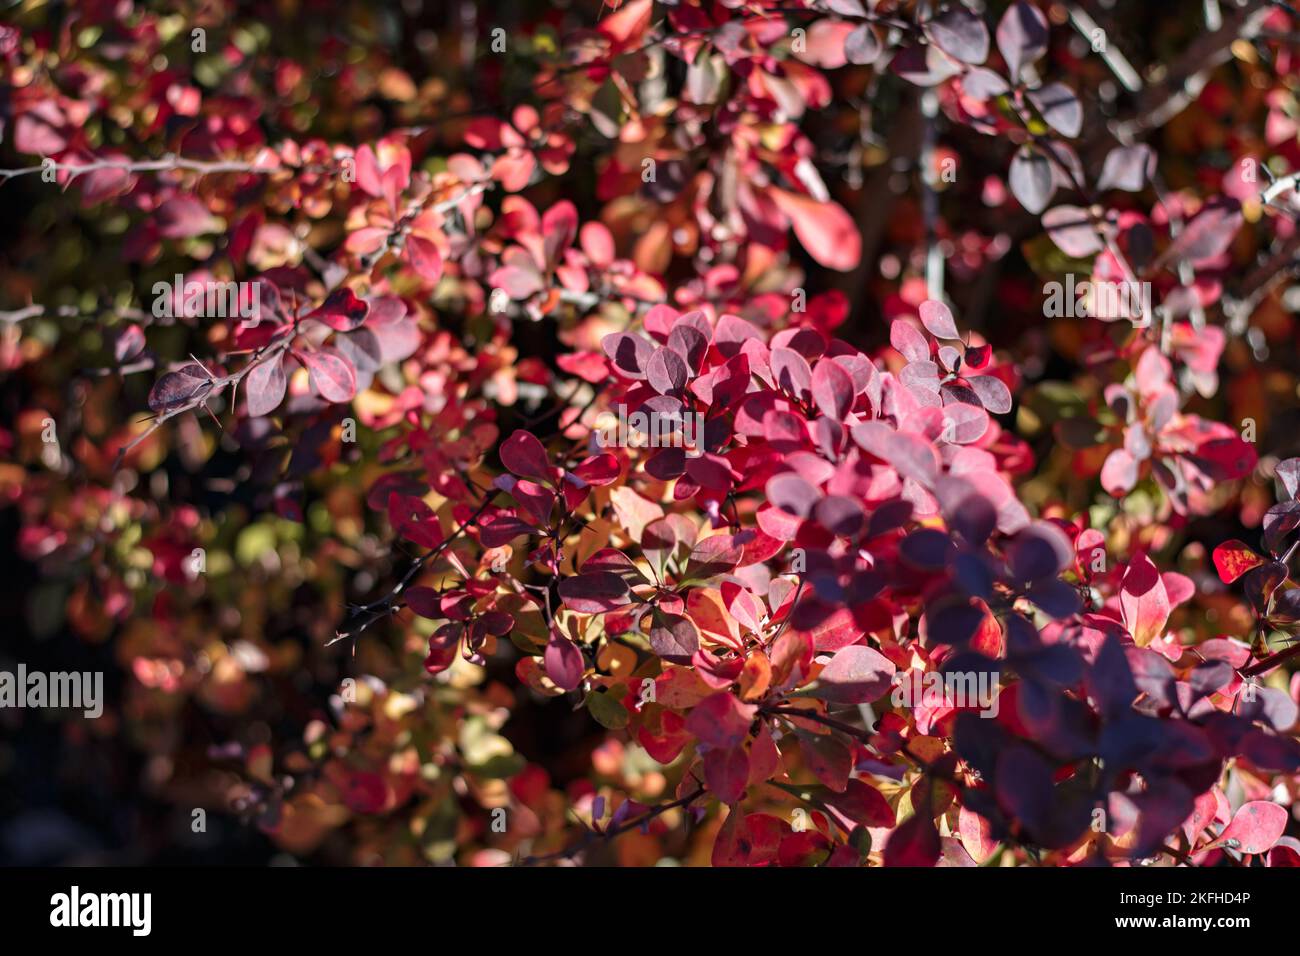 Bush of barberry in the autumn with dark red leaves. Bunches of bushes with red-orange leaves. Background image. Berberis, commonly known as barberry. Stock Photo